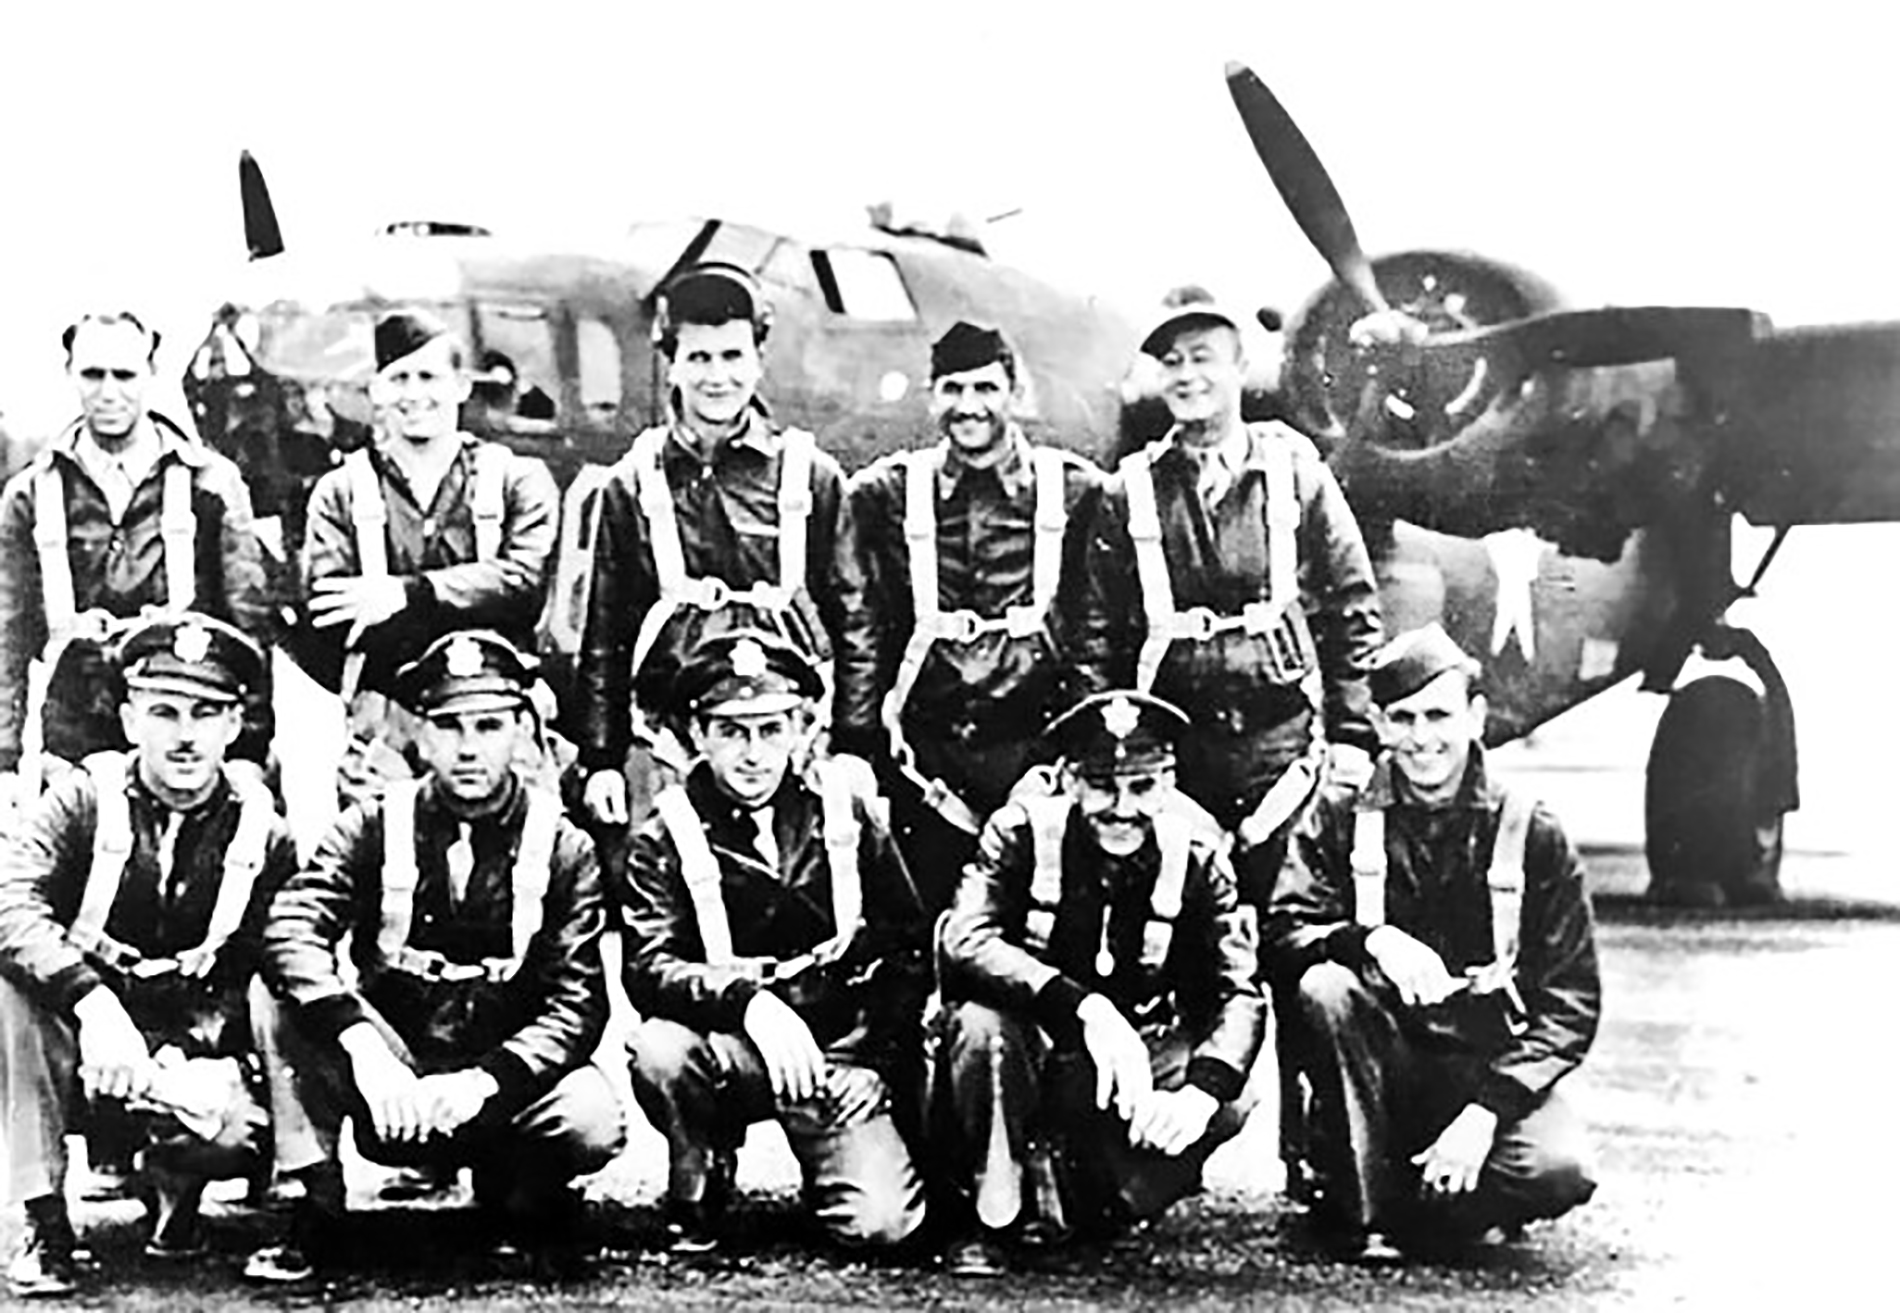 First Lt. Roy C. Harms with a WWII bomber plane and his crew.